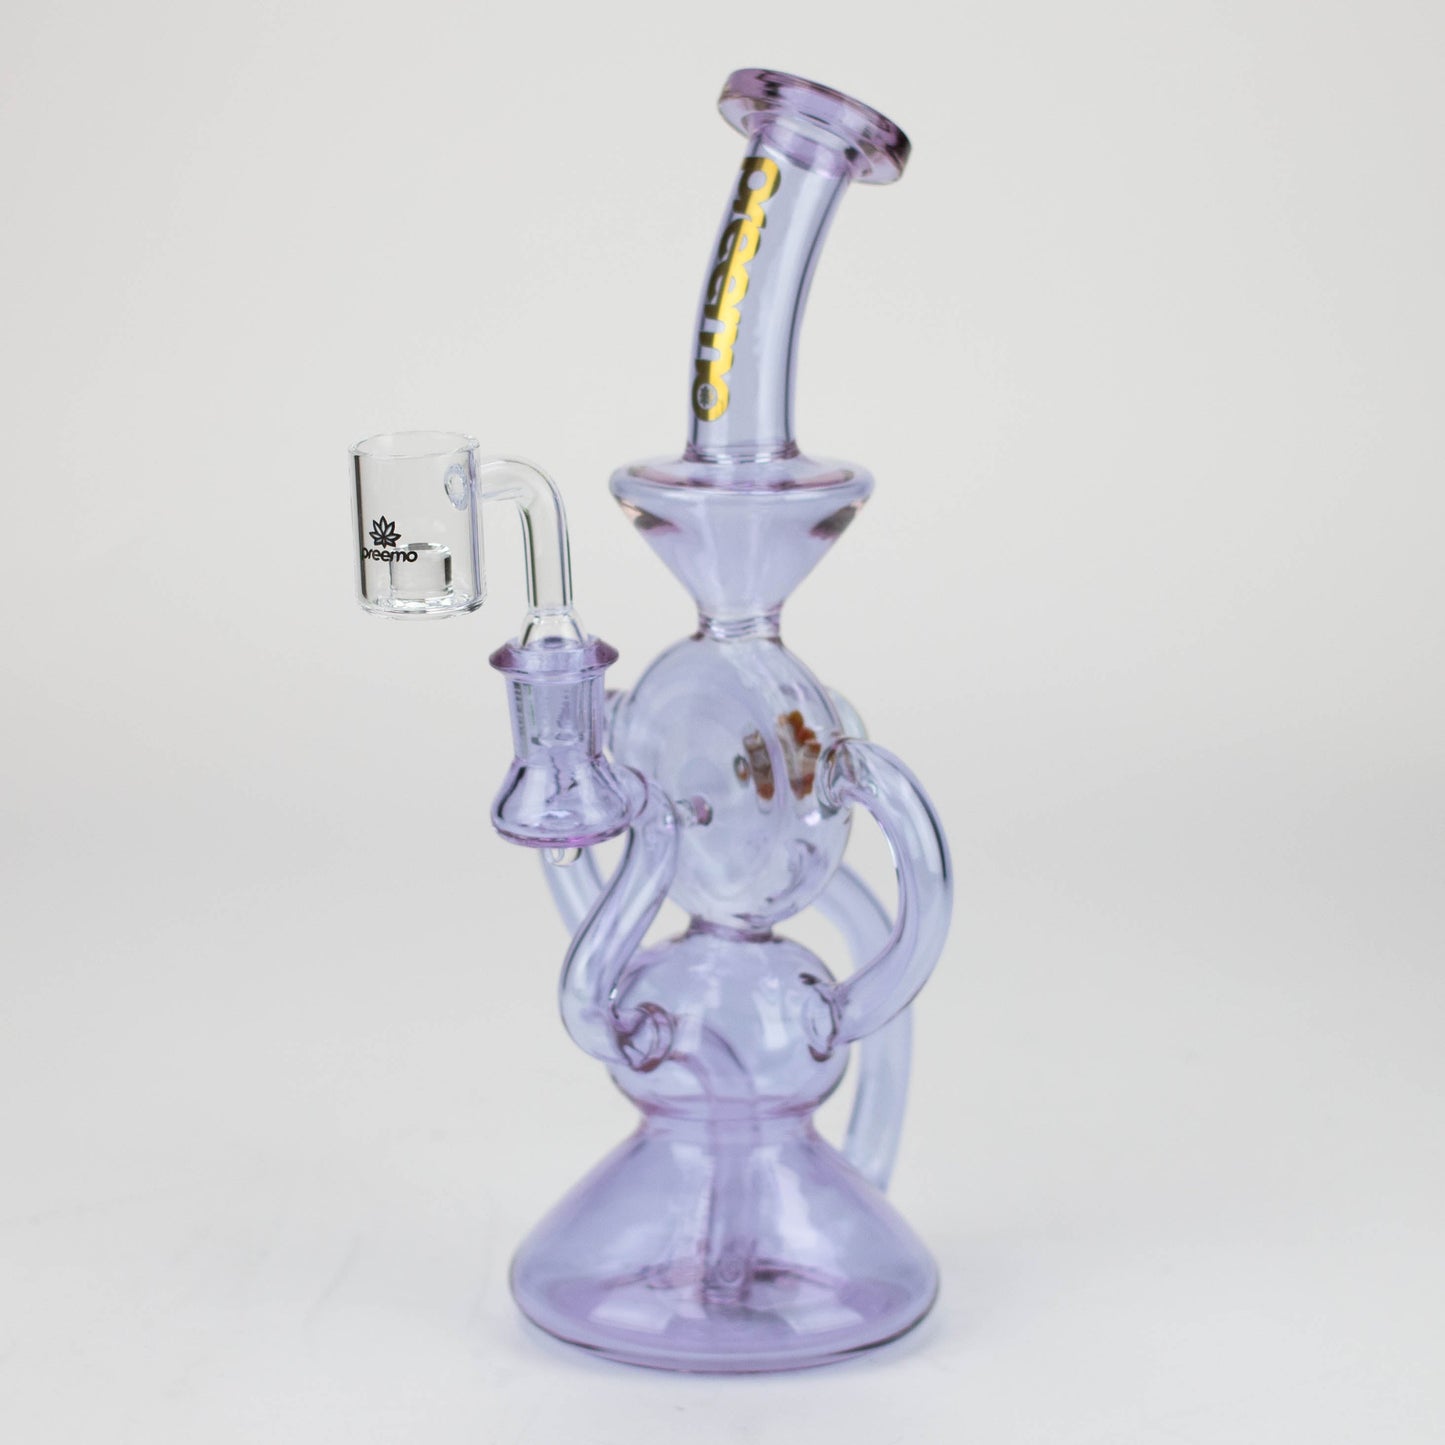 preemo - 11 inch 3-Arm Implosion Marble Recycler [P035]_5